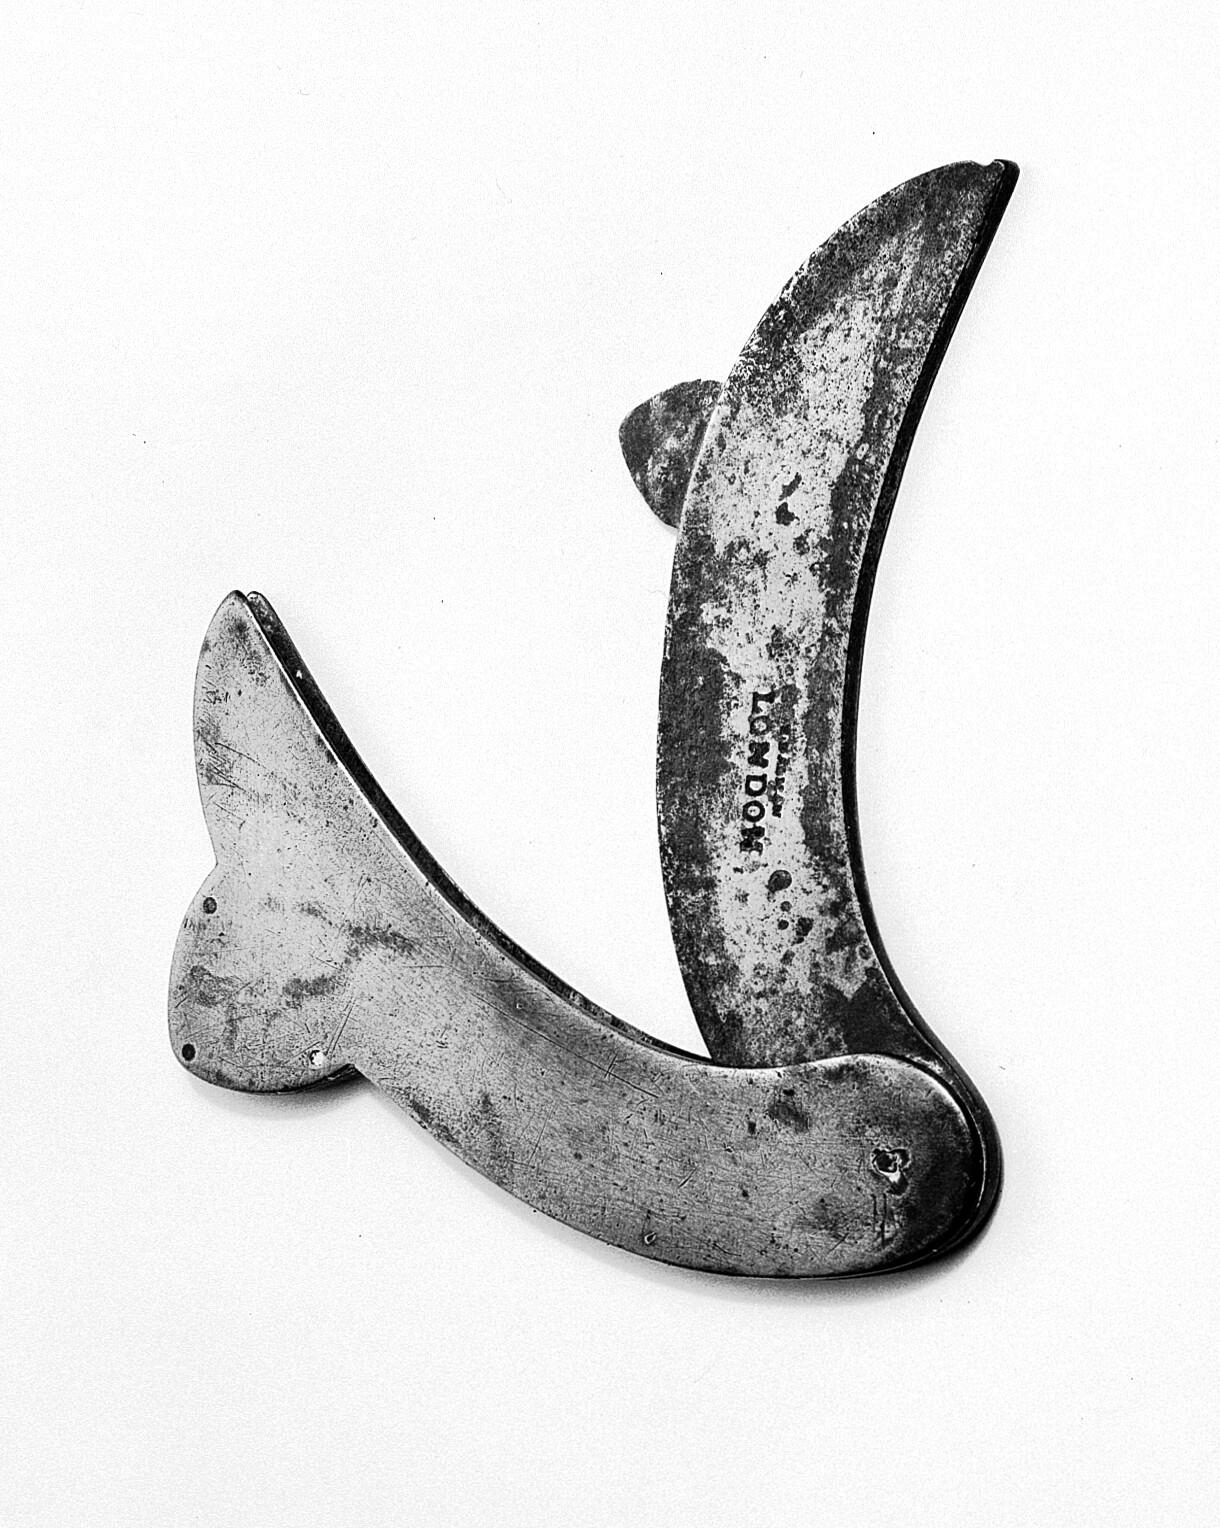 Photograph showing a fleam, which is made of a curved blade that appears to fold back inside a case like a penknife. The bade has a large notch on the outside of the curve. It has London engraved onto it and shows considerable signs of wear and age. 